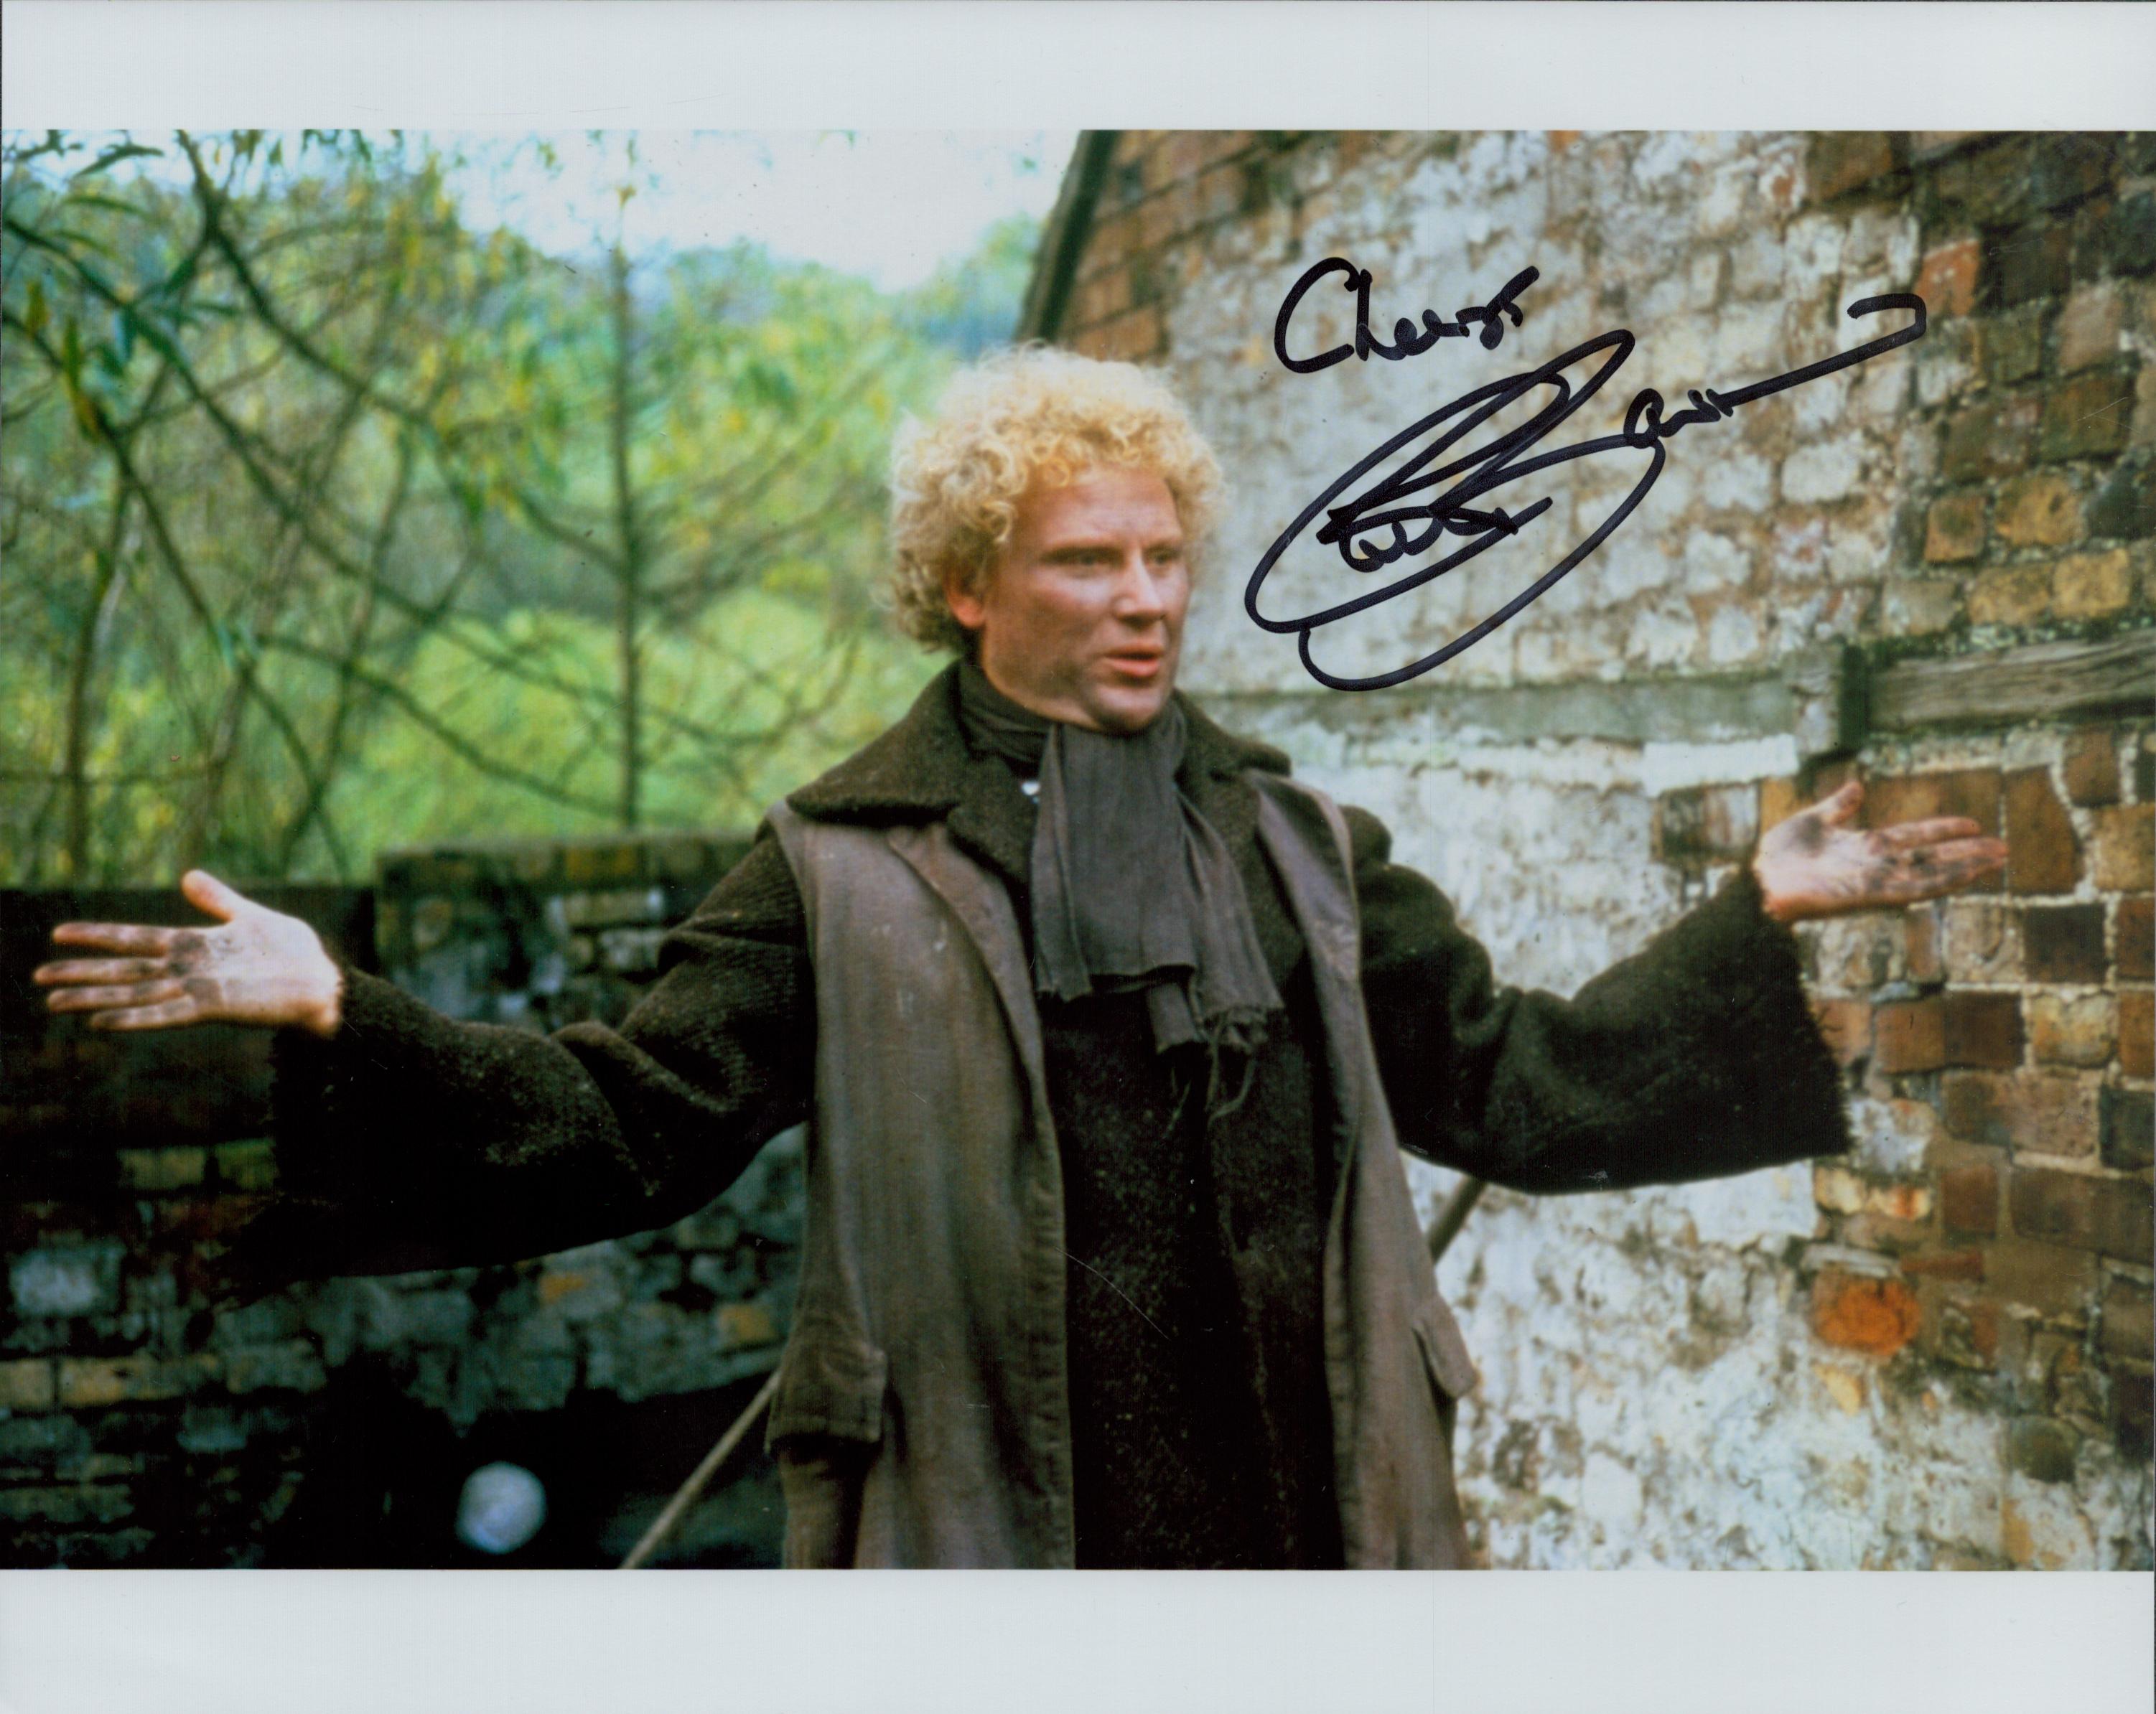 Colin Baker signed Colour Photo 10x8 Inch. An English Actor 'Dr Who'. Good Condition. All autographs